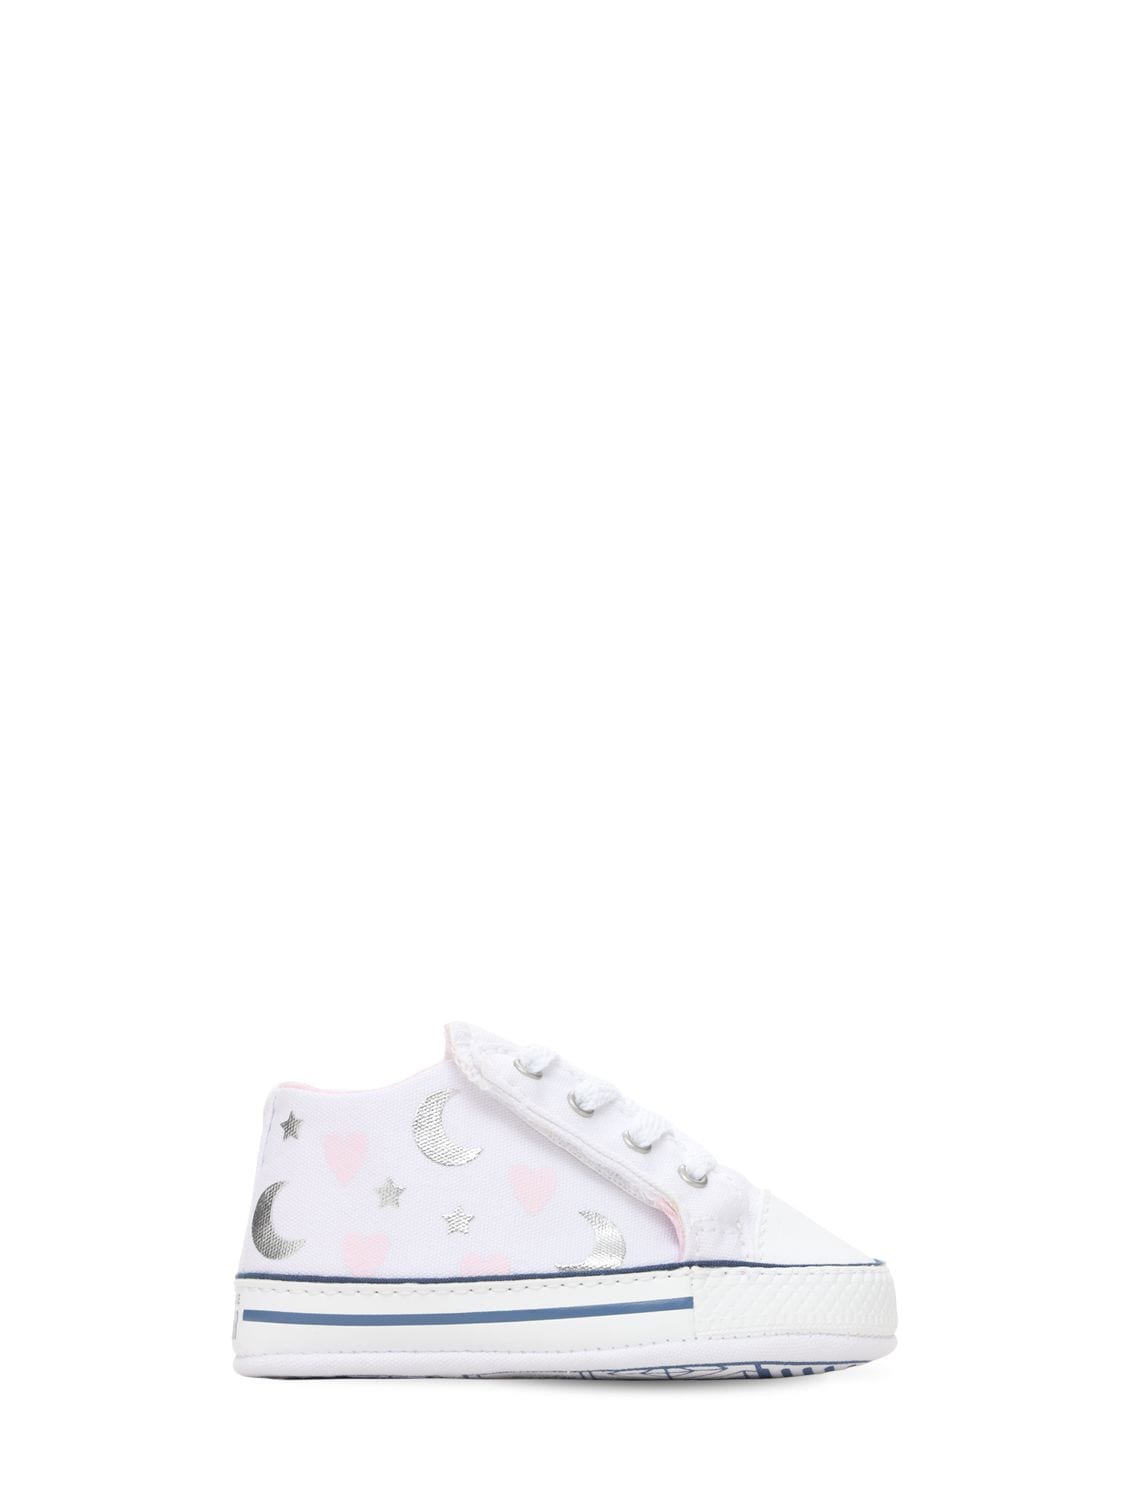 Converse Kids' Chuck Taylor Cribster Pre-walker Shoes In White